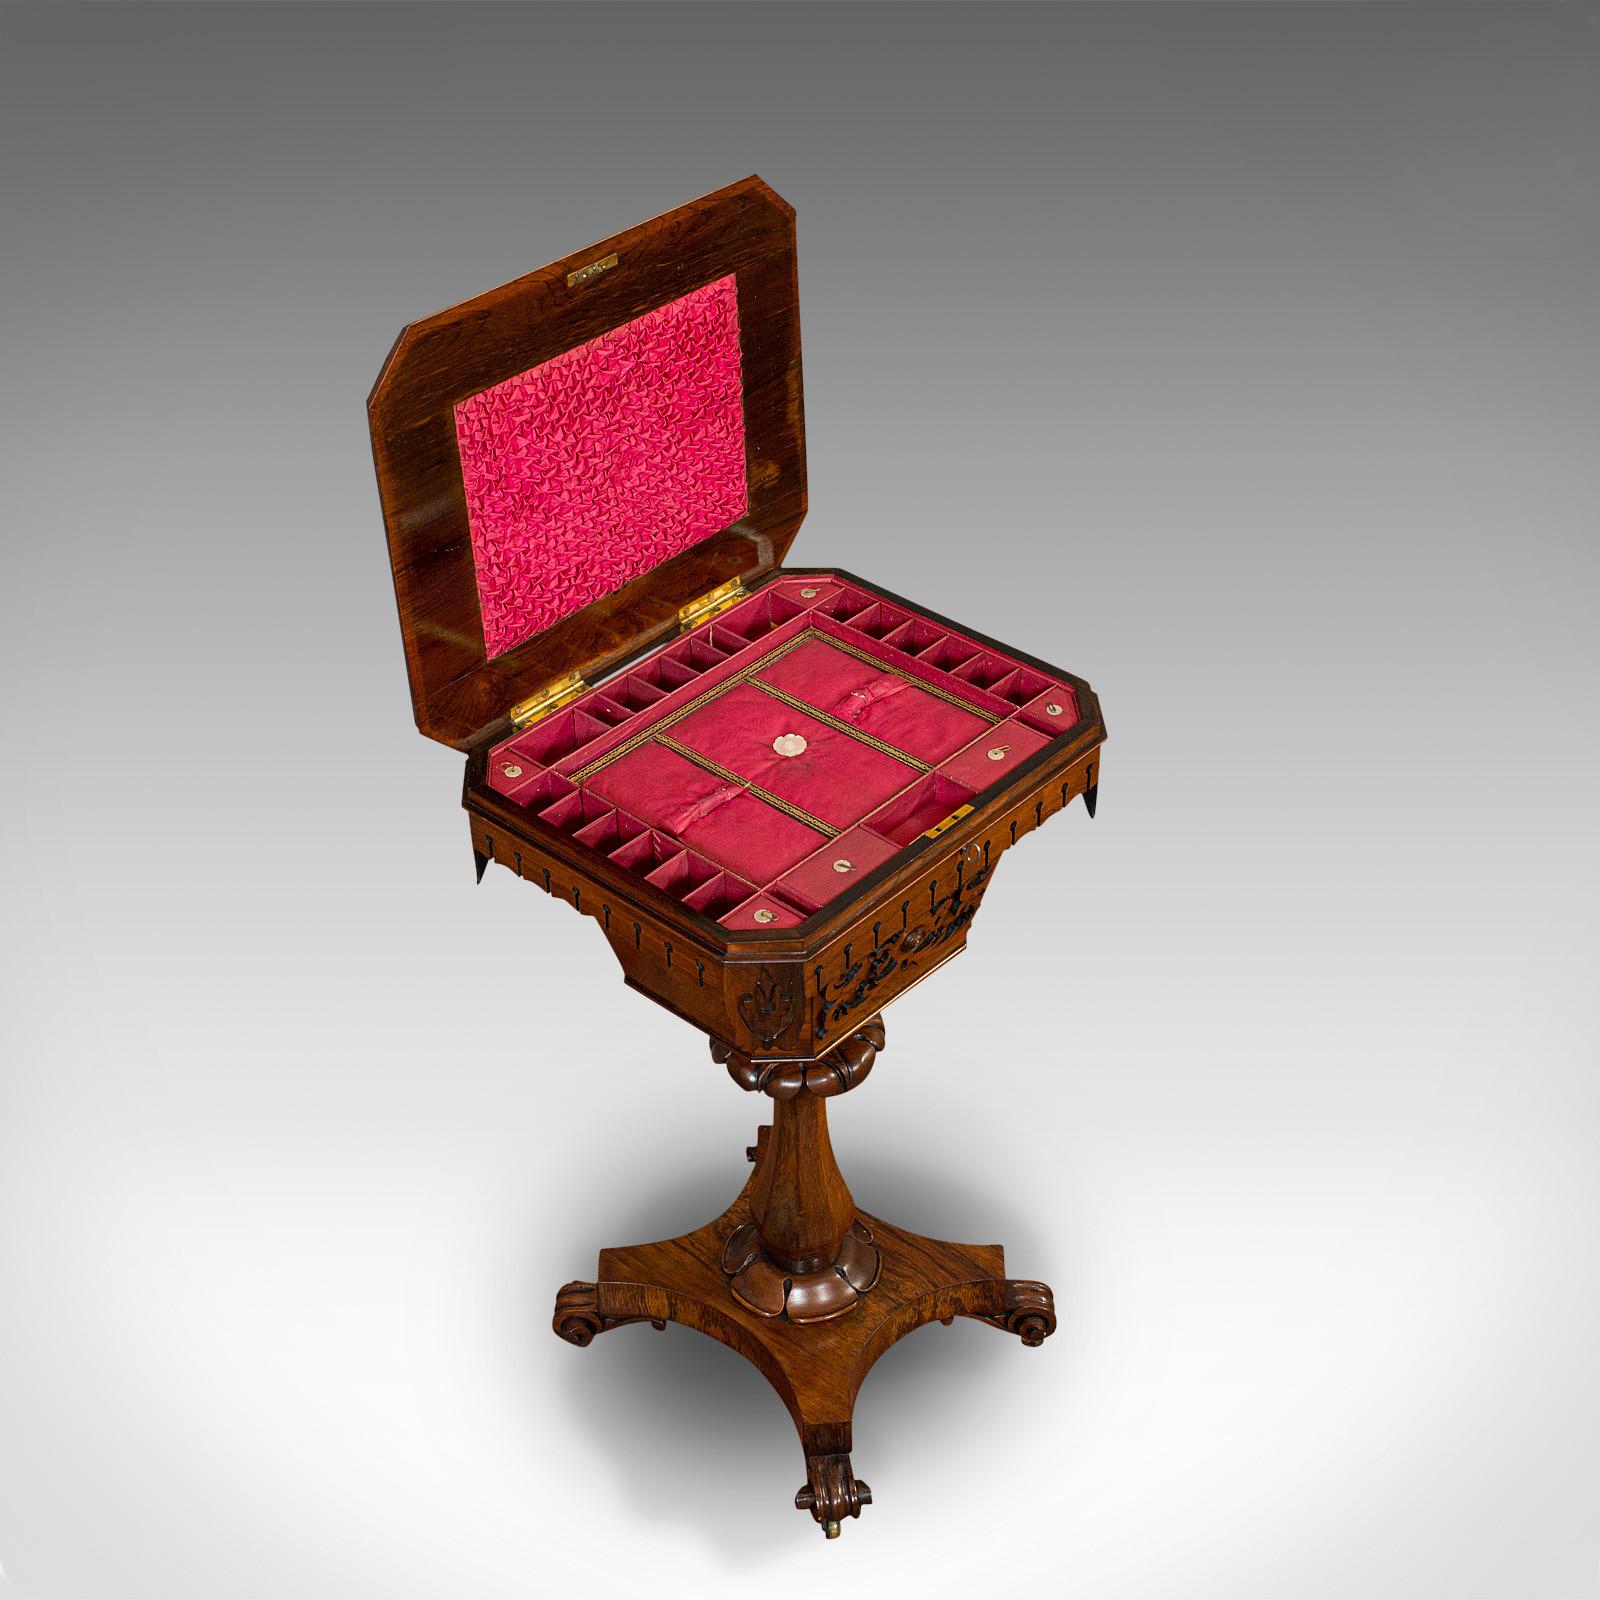 Antique Lady's Work Box, English, Rosewood, Sewing, Table, Regency, circa 1820 4